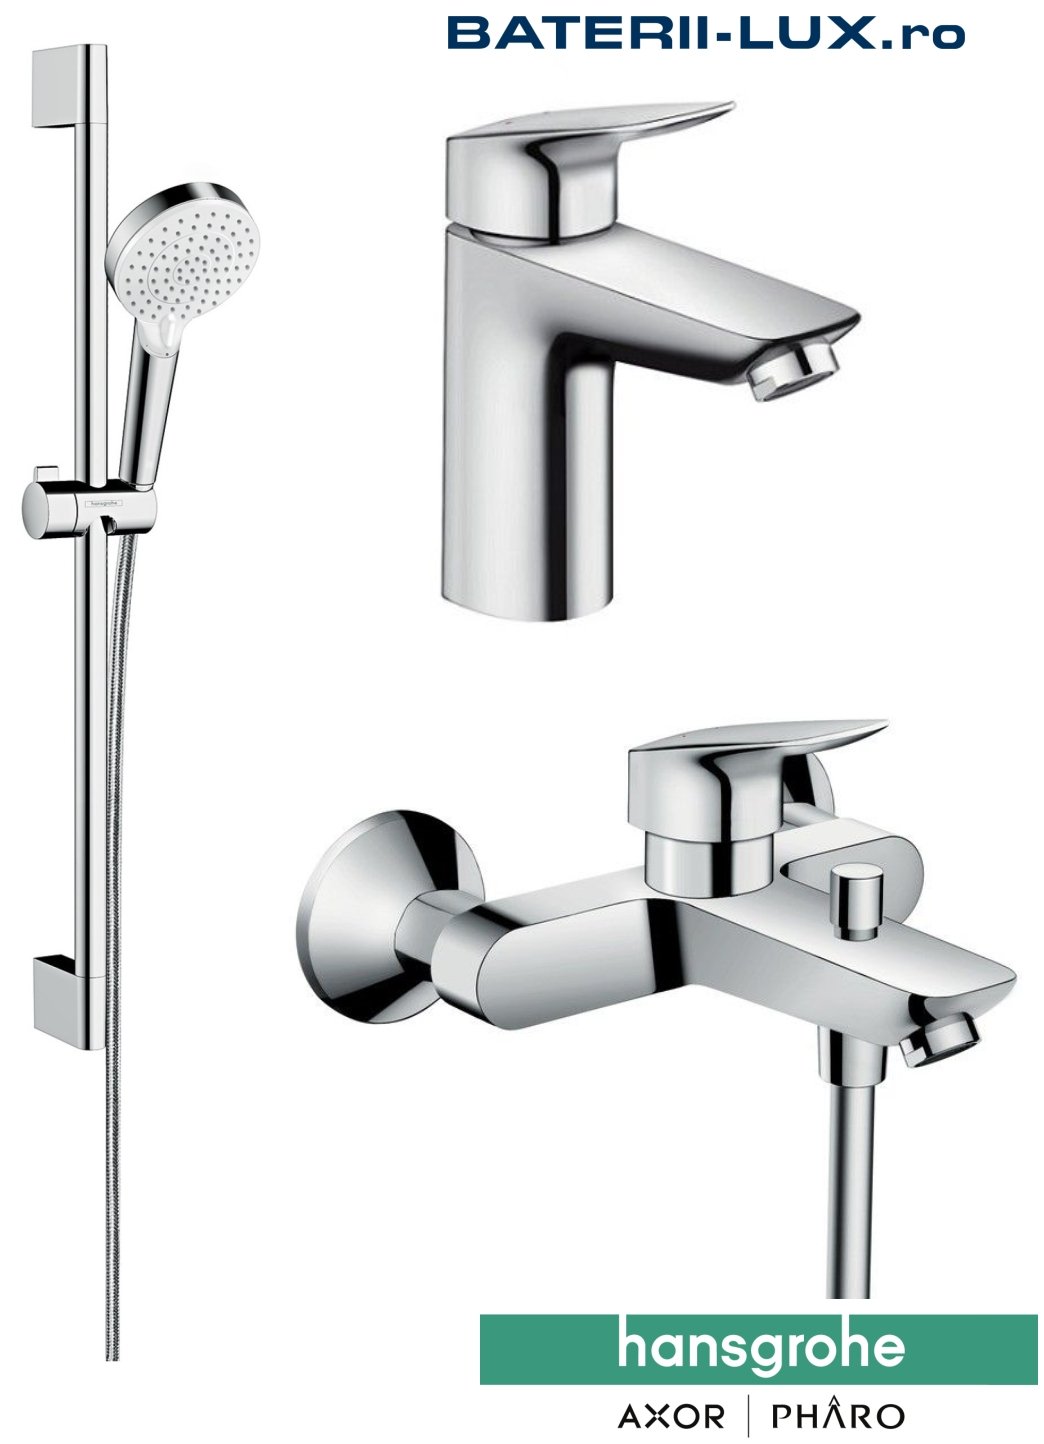 Set complet baterii baie cada Hansgrohe Logis100(71100000,71400000,26532400) baterii-lux.ro